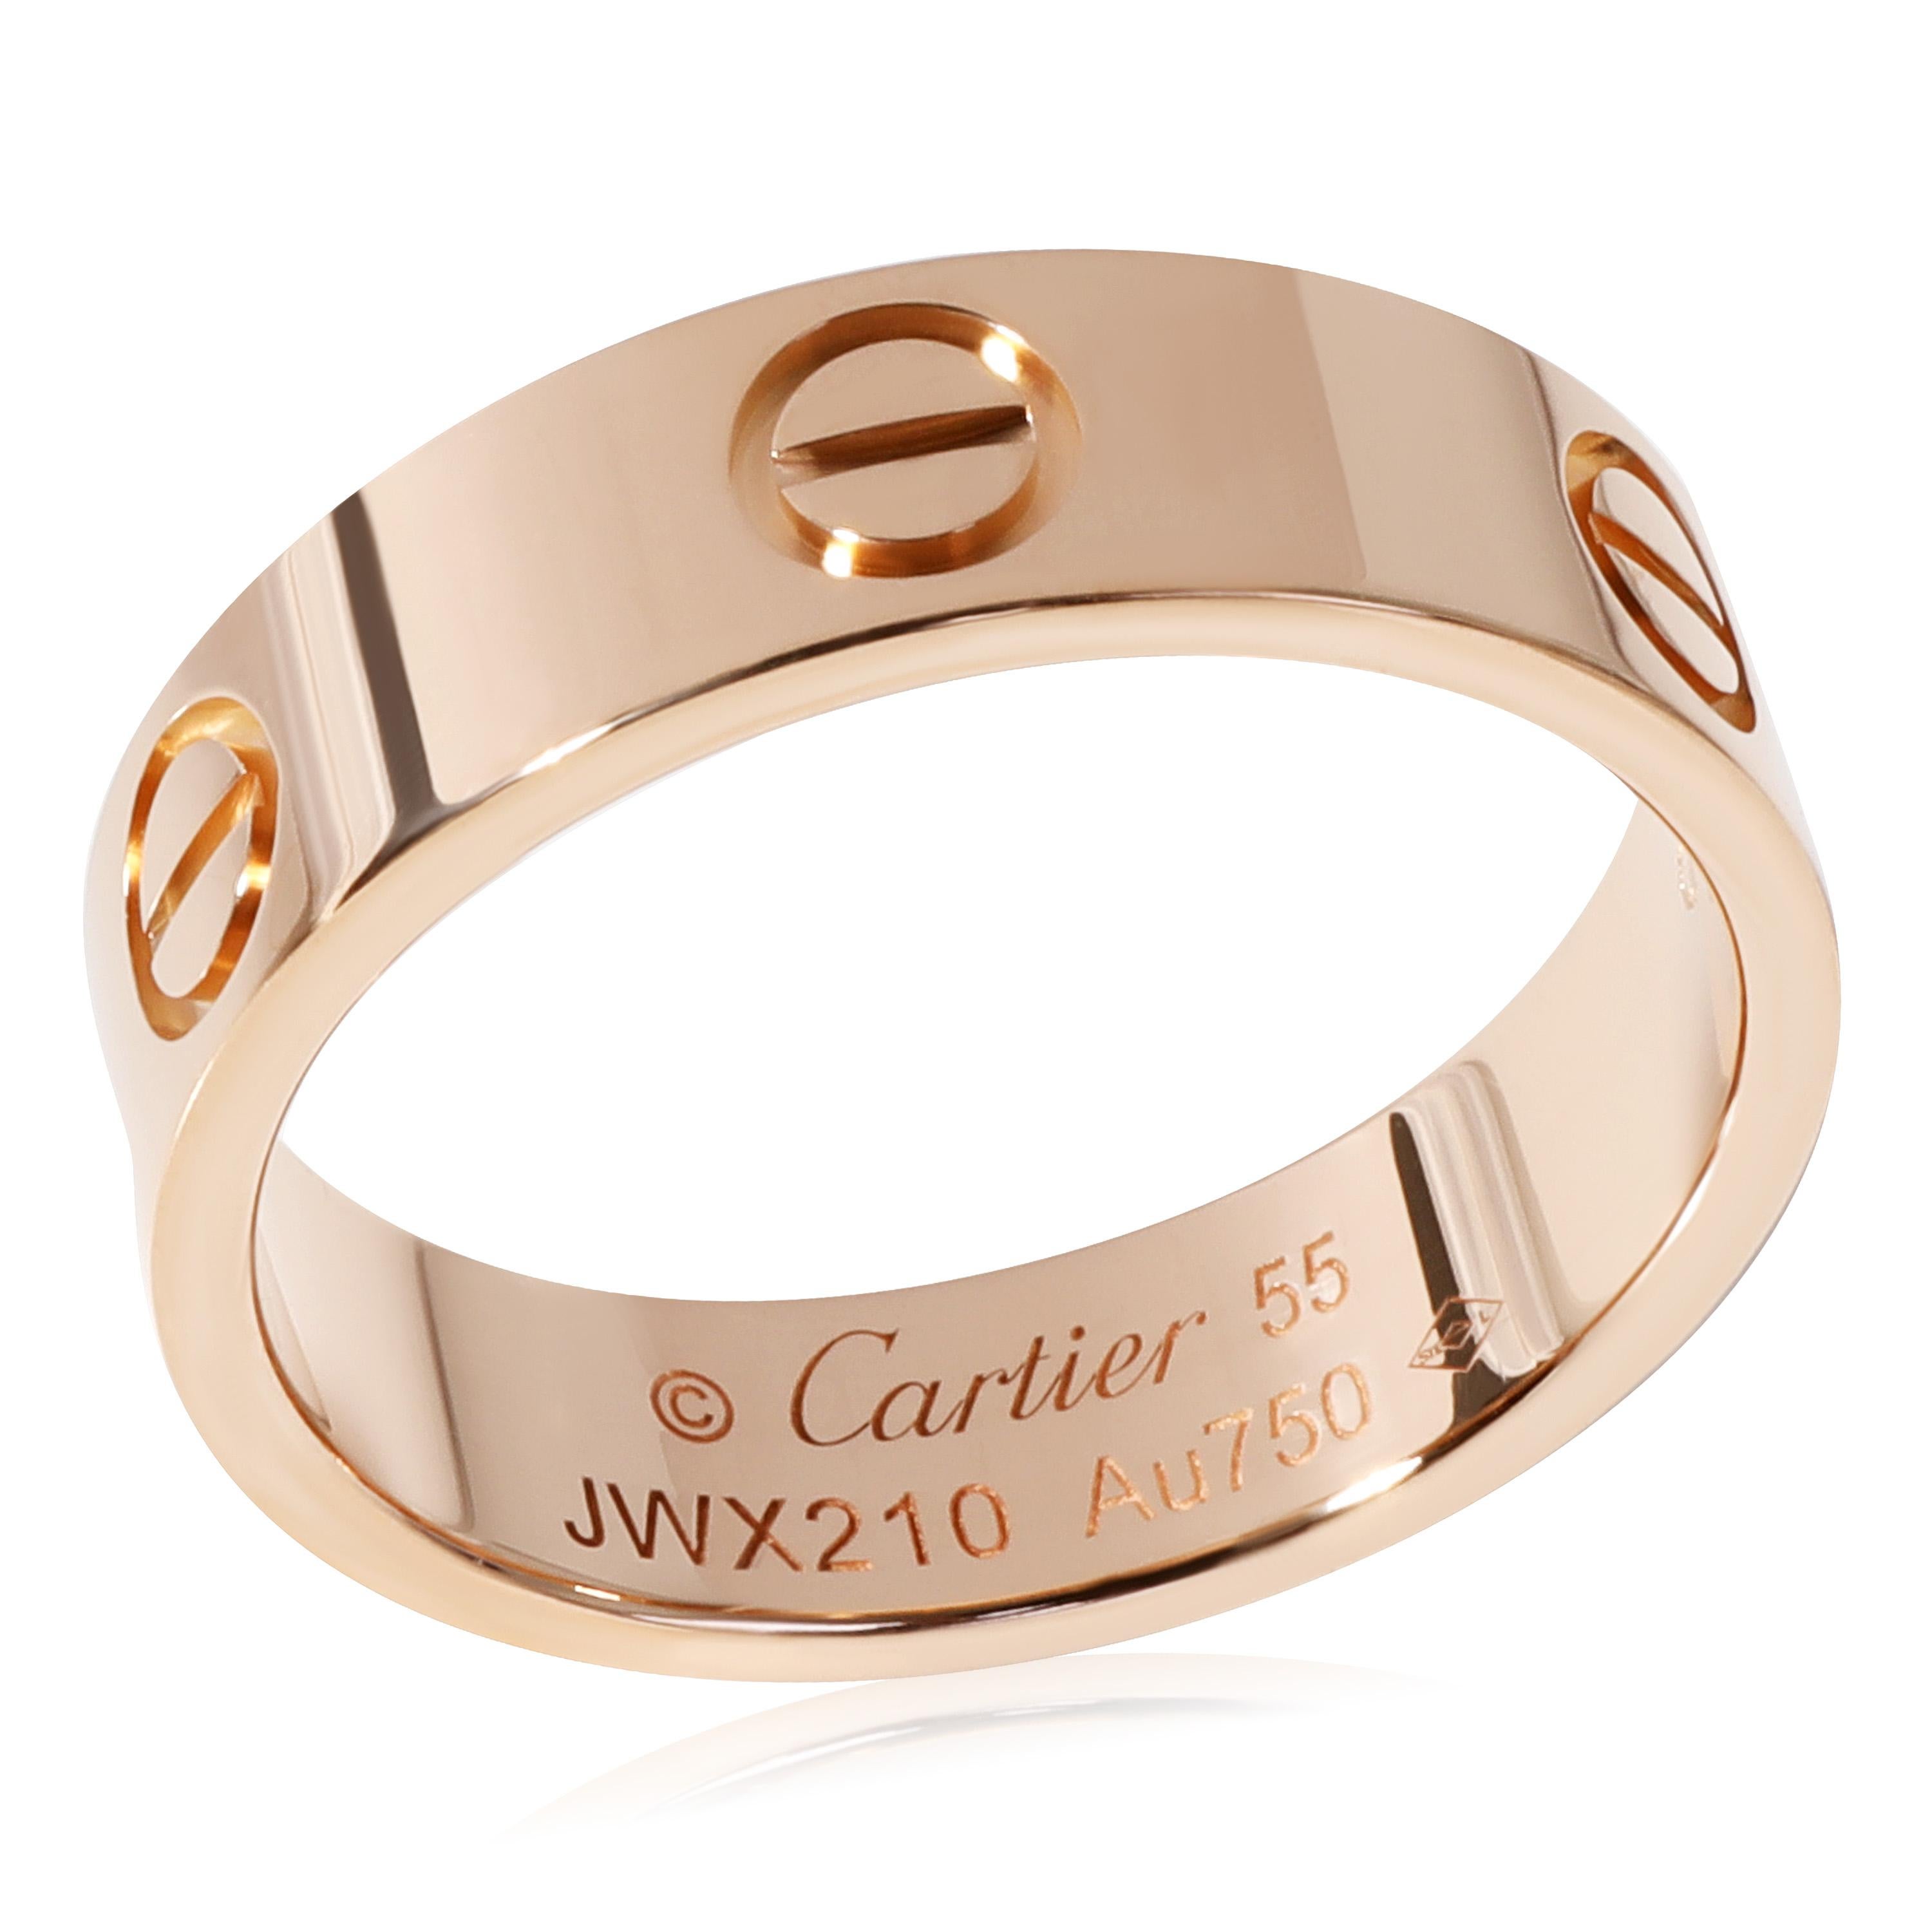 Cartier Love Ring in 18K Rose Gold

PRIMARY DETAILS
SKU: 119059
Listing Title: Cartier Love Ring in 18K Rose Gold
Condition Description: Retails for 1820 USD. In excellent condition and recently polished. Ring size is 7.25.Comes with Certificate of